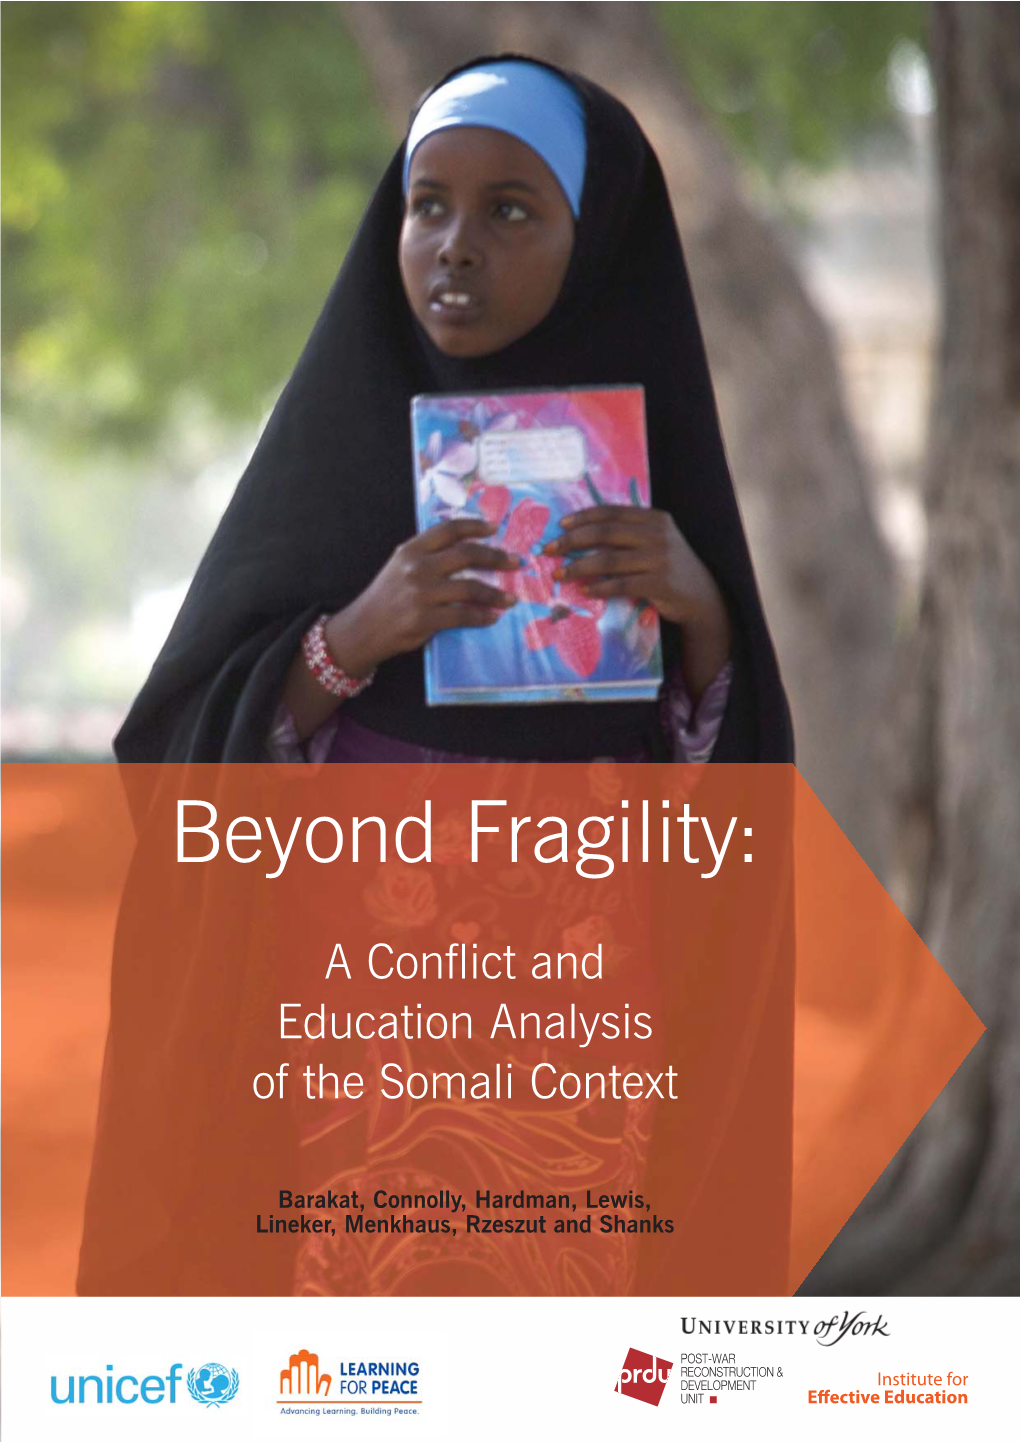 A Conflict and Education Analysis of the Somali Context